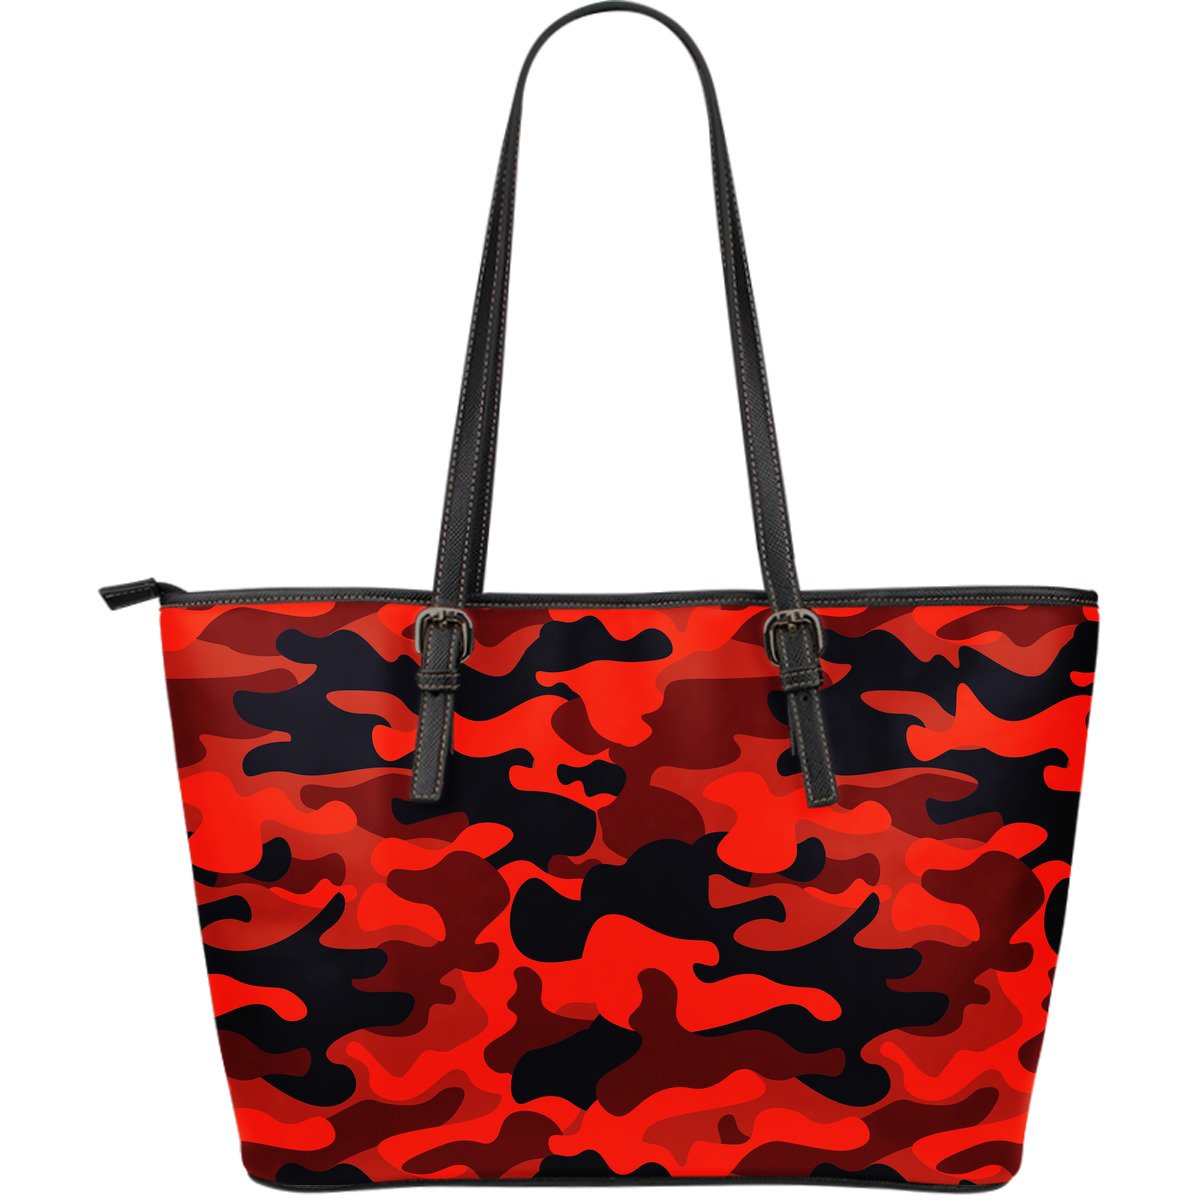 Red And Black Camouflage Print Leather Tote Bag